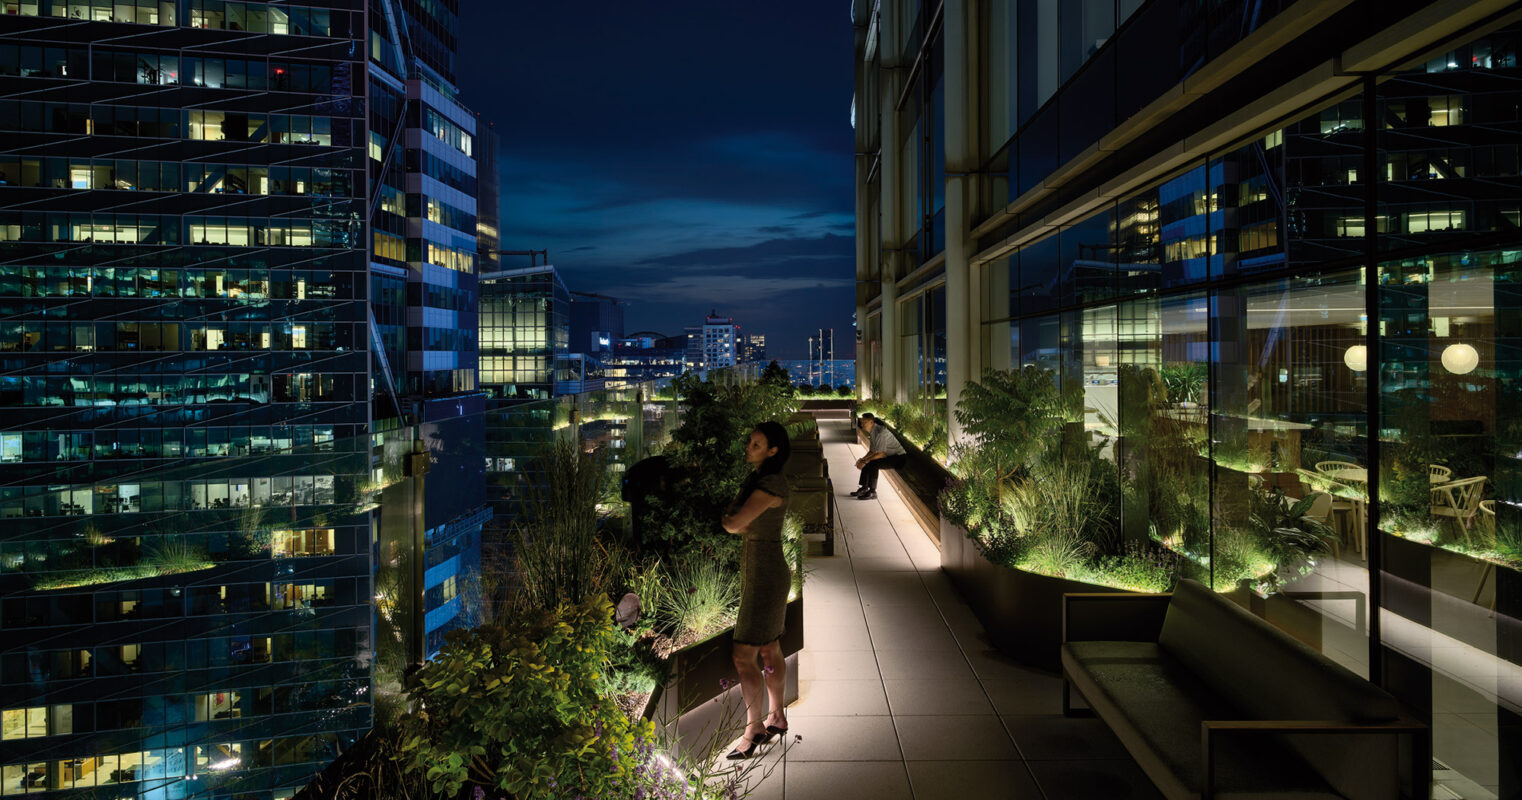 A serene urban rooftop garden at twilight, with lush greenery and inviting benches, nestled between glowing contemporary office buildings under a dusky sky.